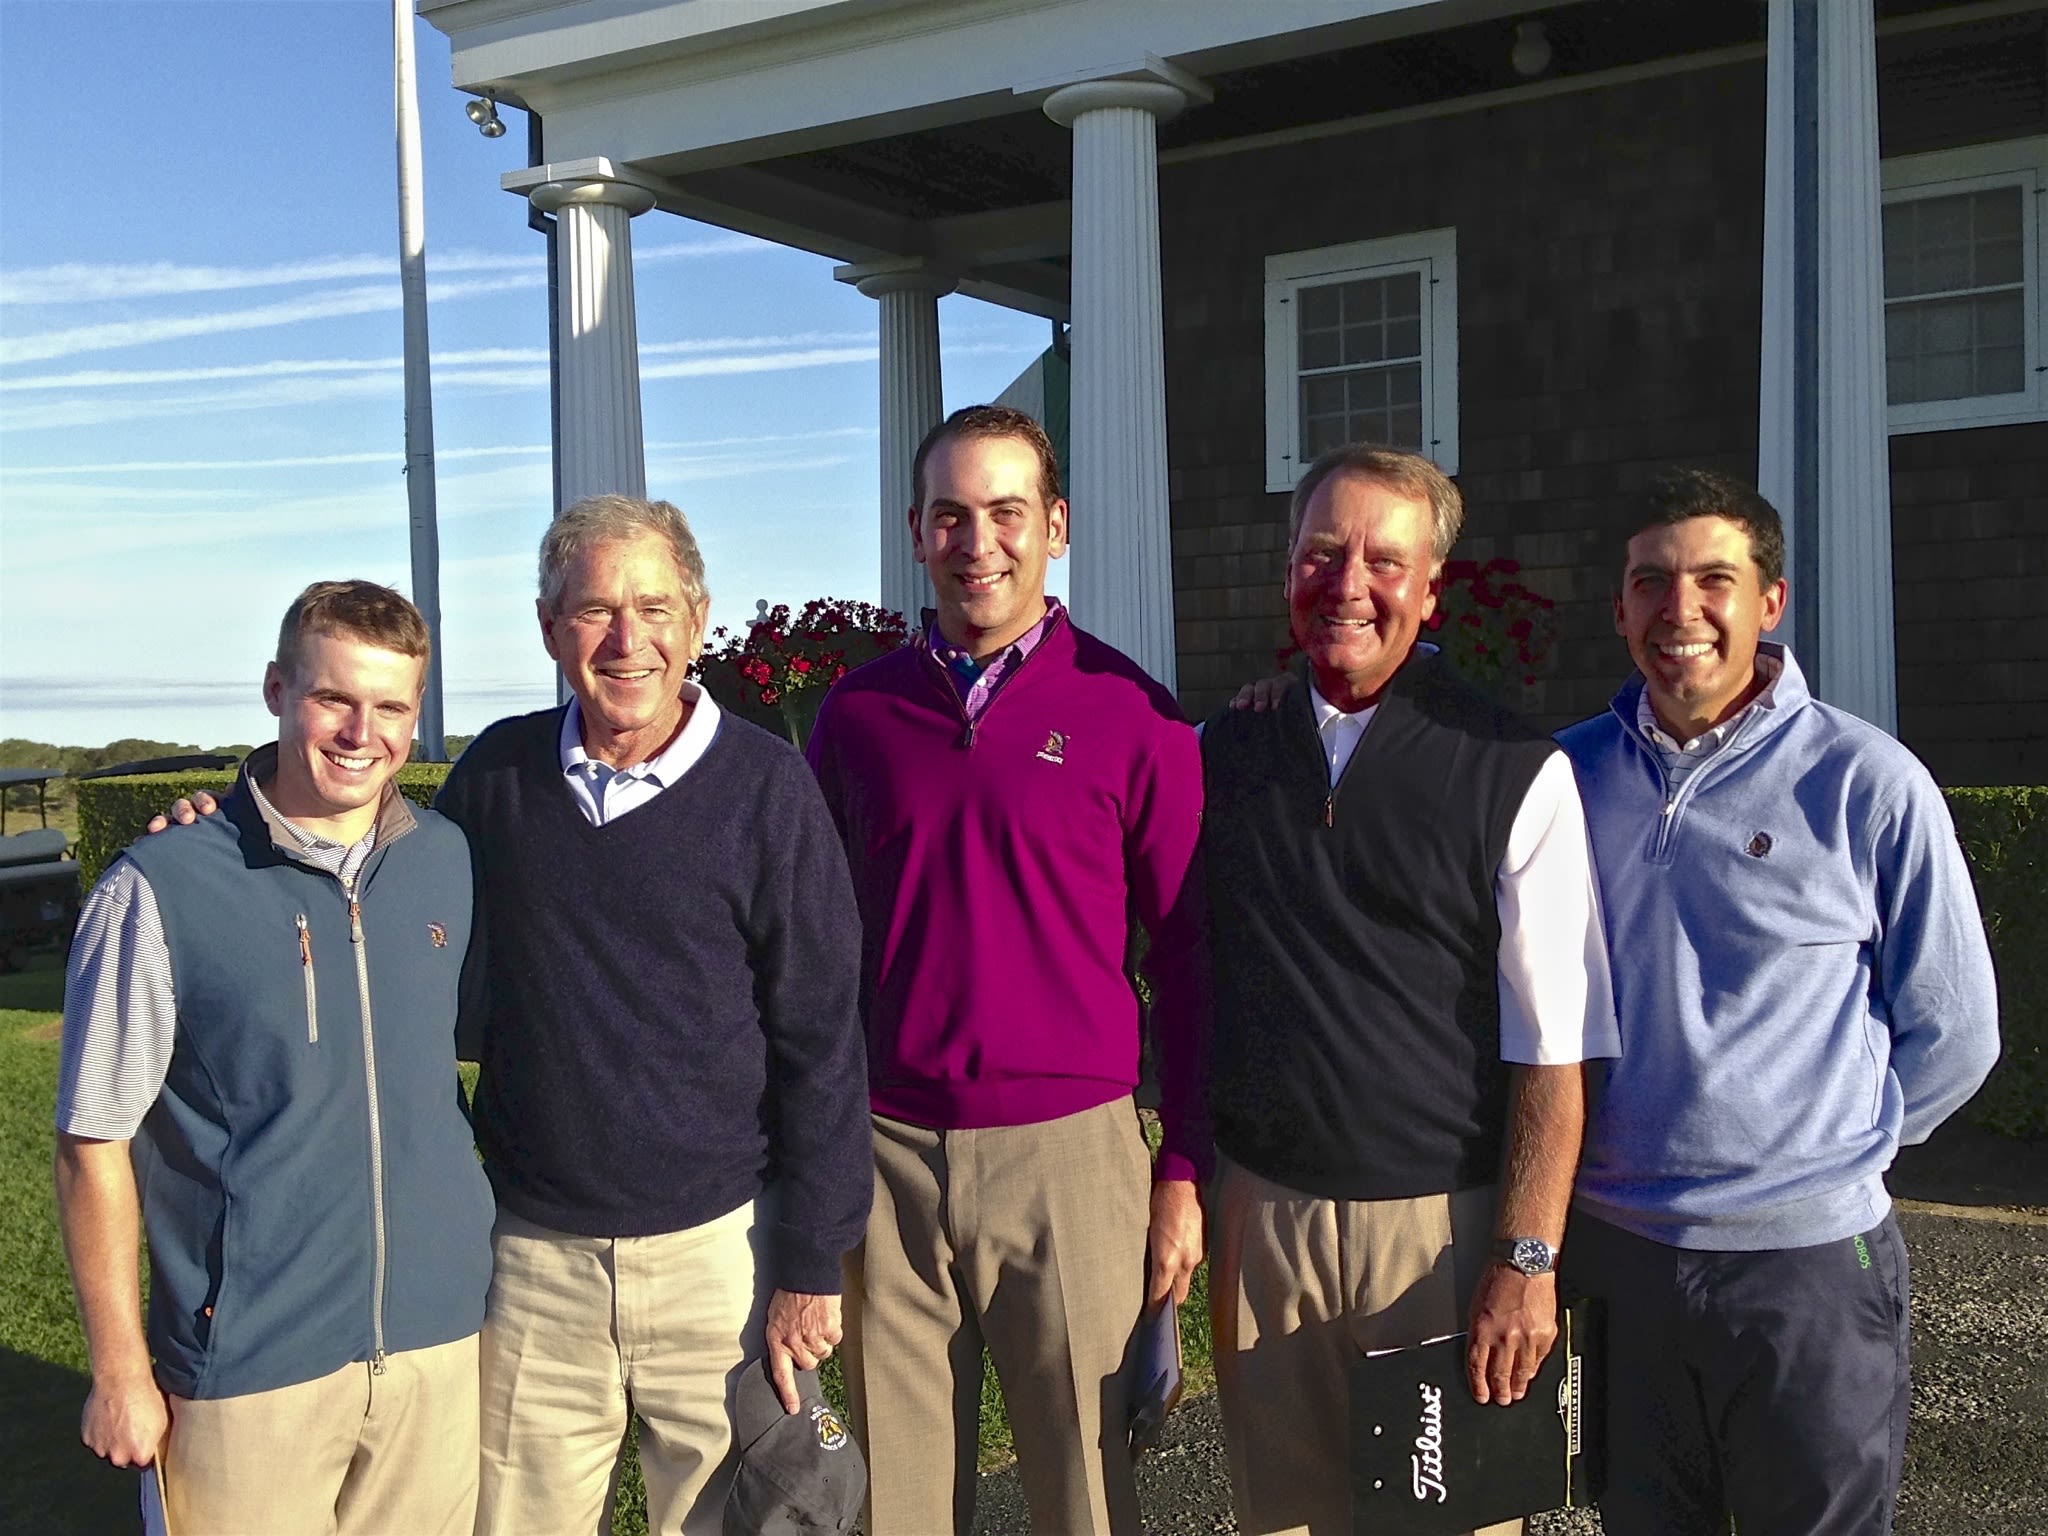 Druga and his staff with President George W. Bush at Shinnecock Hills.